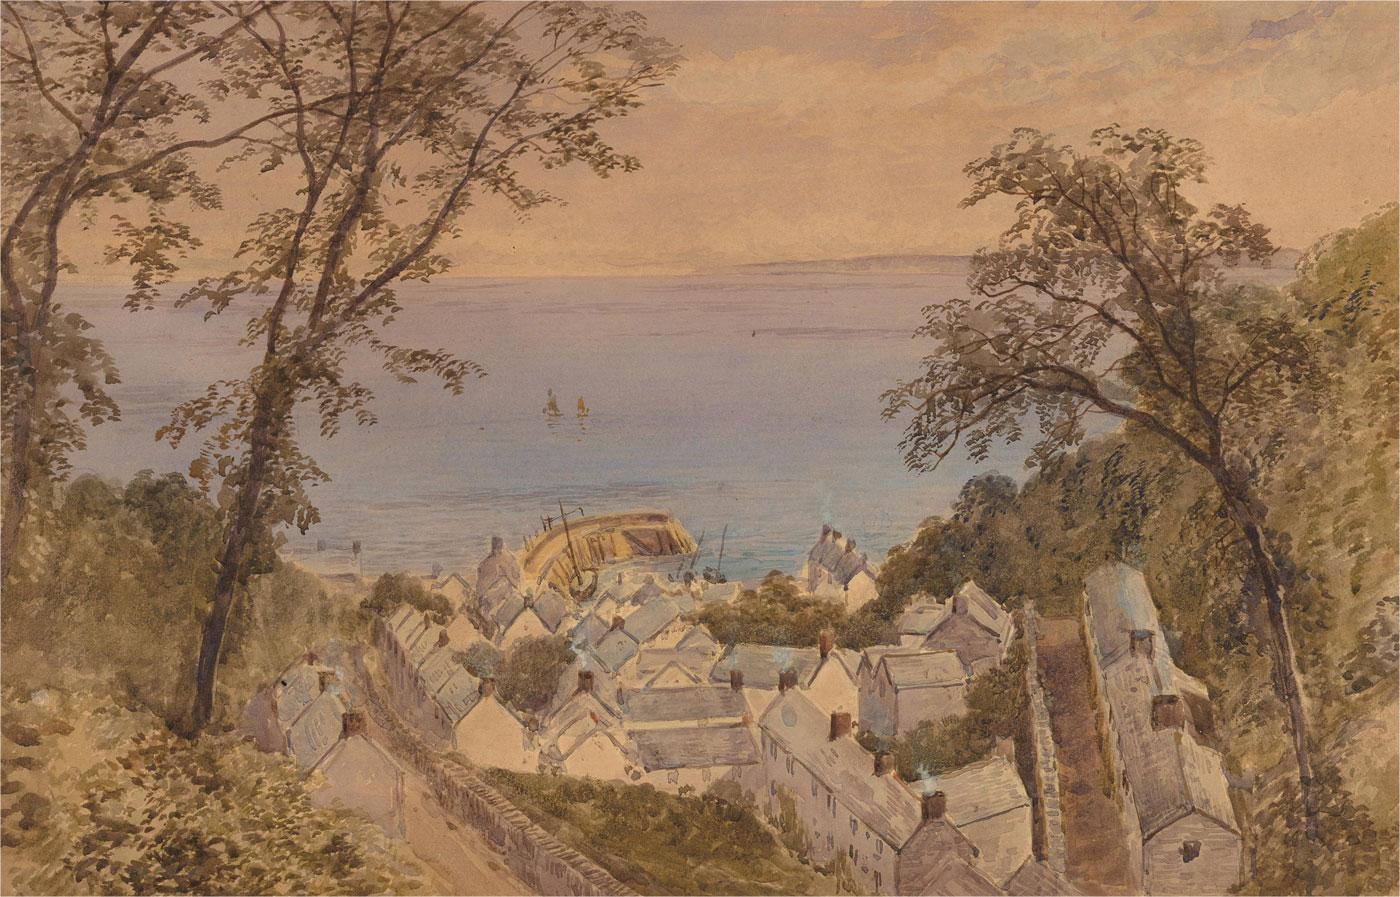 A thoroughly charming coastal scene in watercolour showing a downward view of a coastal town with a curved stone jetty on the shore. The artist has signed to the lower left corner. The tail of the "y" from the artist's signature has been cropped